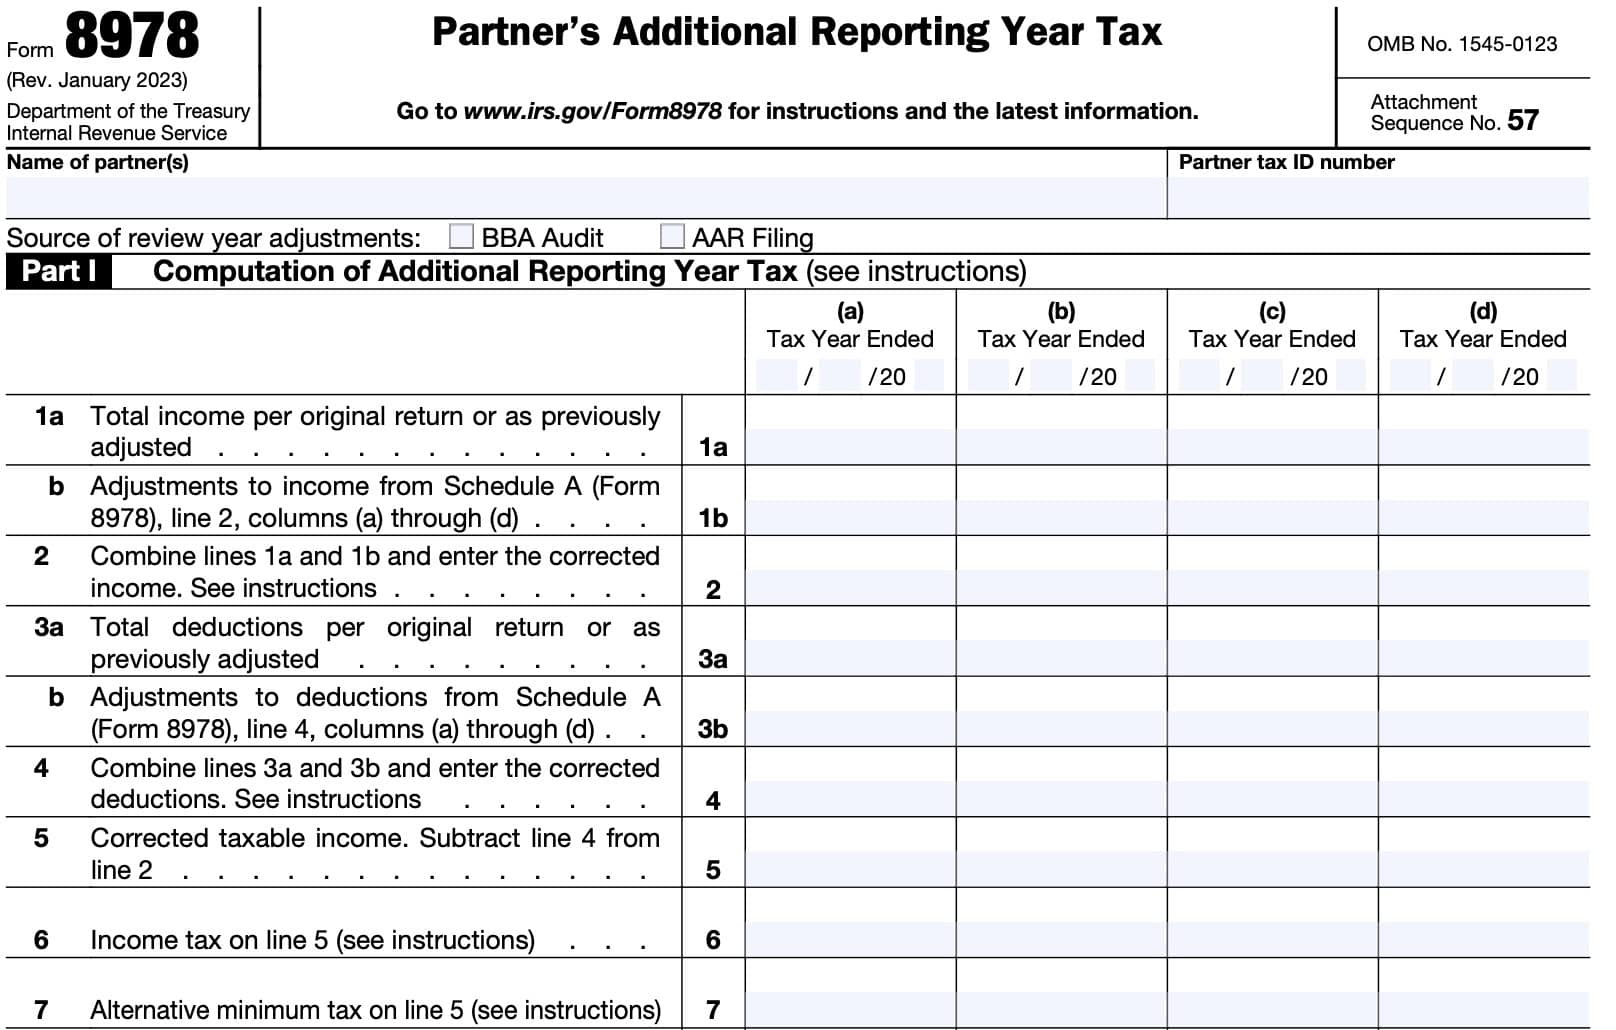 irs form 8978, part I: computation of additional reporting year tax